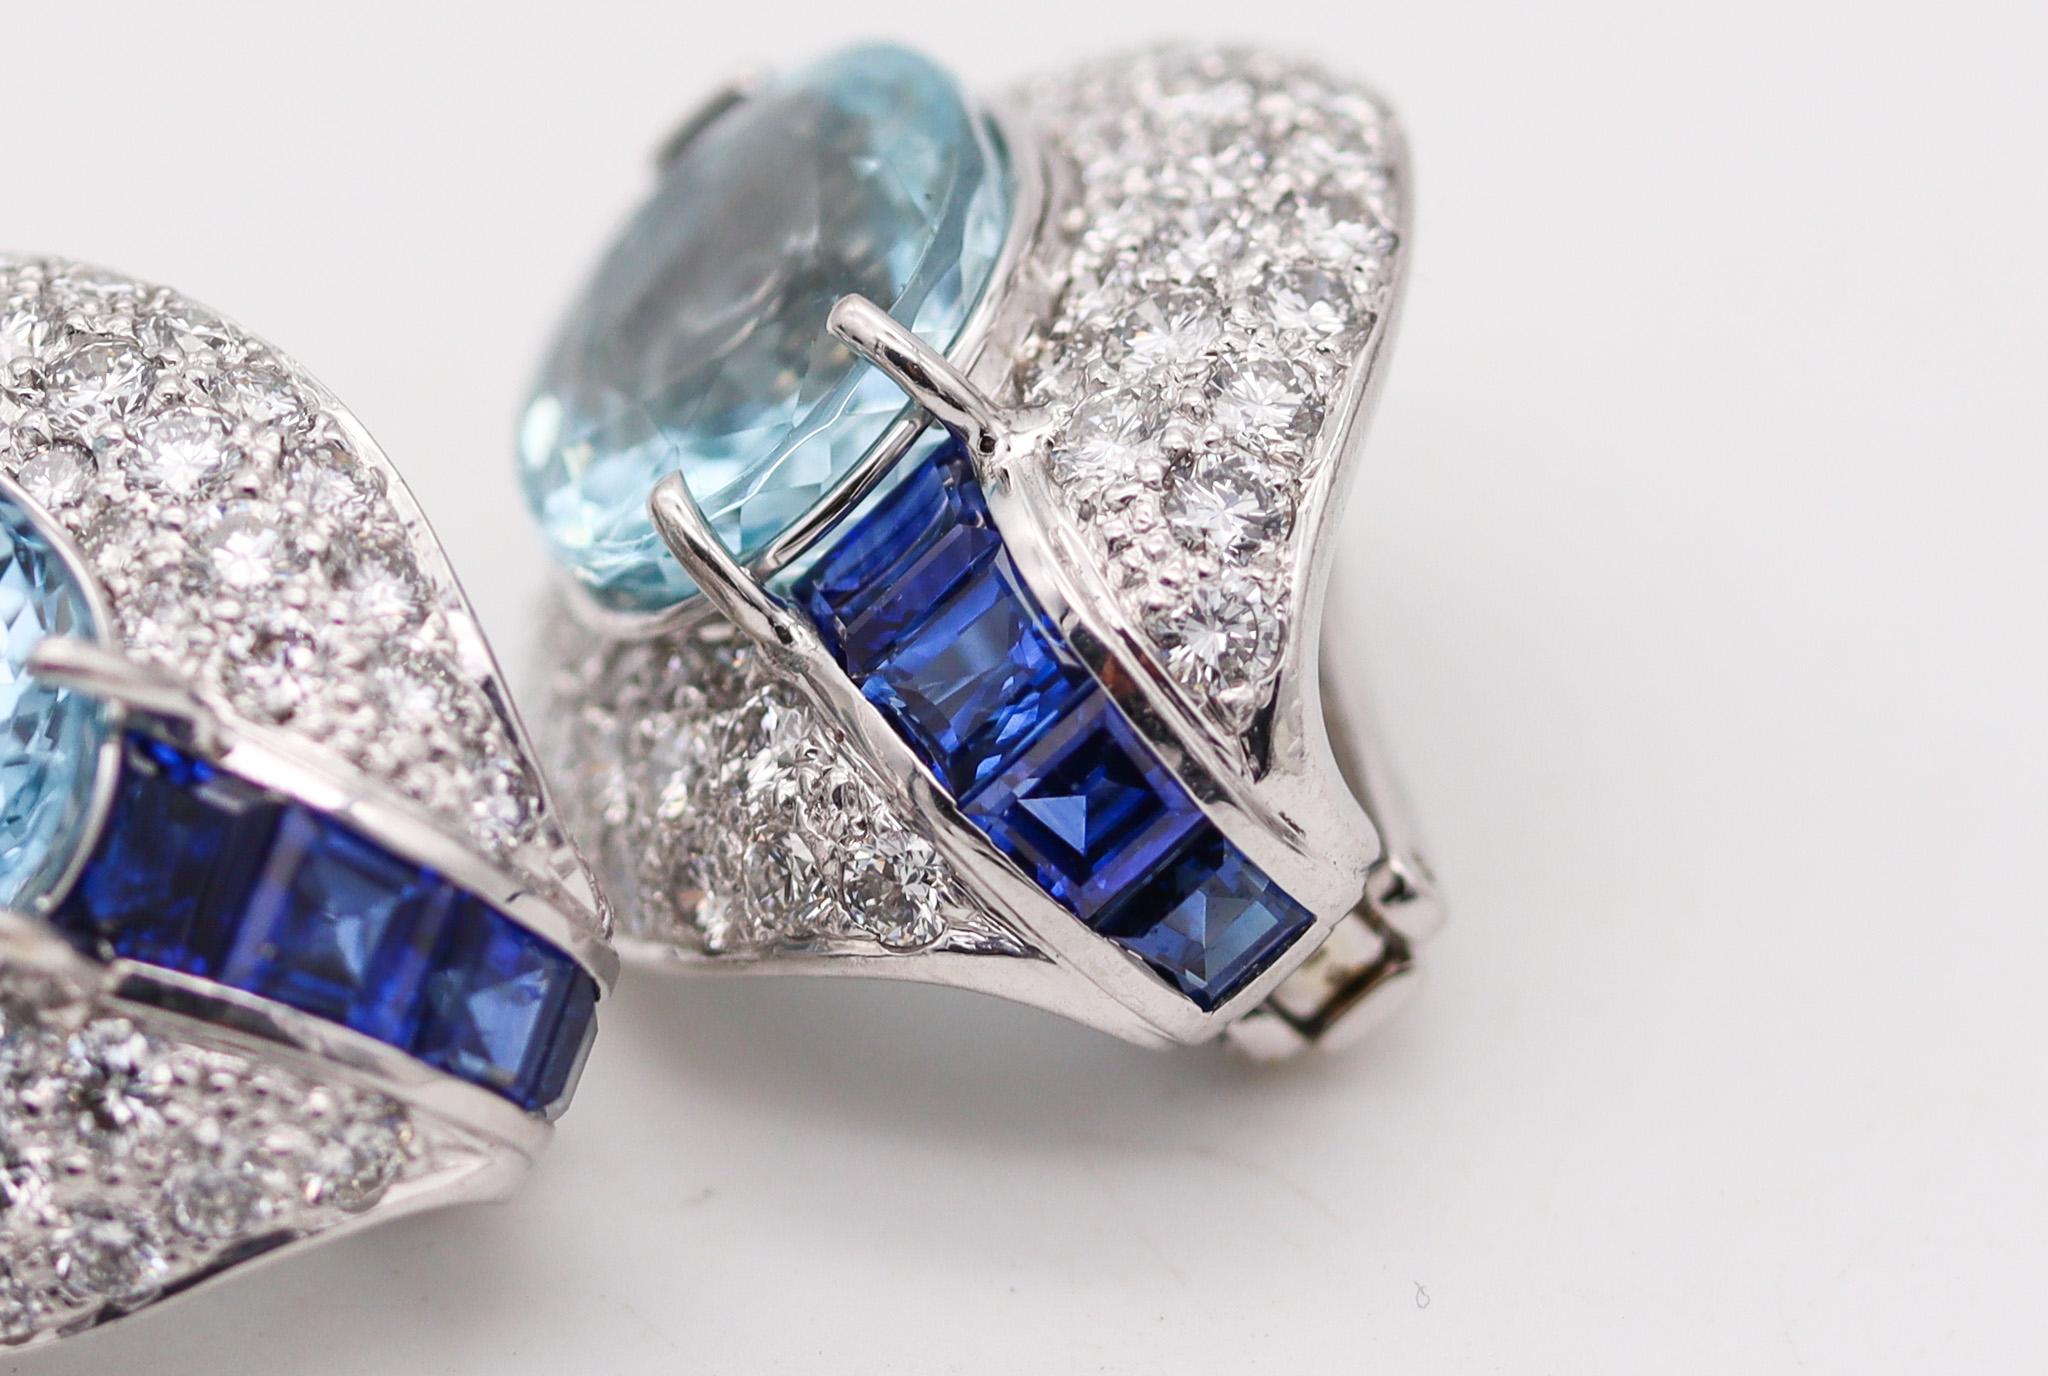 Oval Cut Hemmerle Munich Platinum Earrings With 30.58 Ctw Aquamarines Diamonds Sapphires For Sale